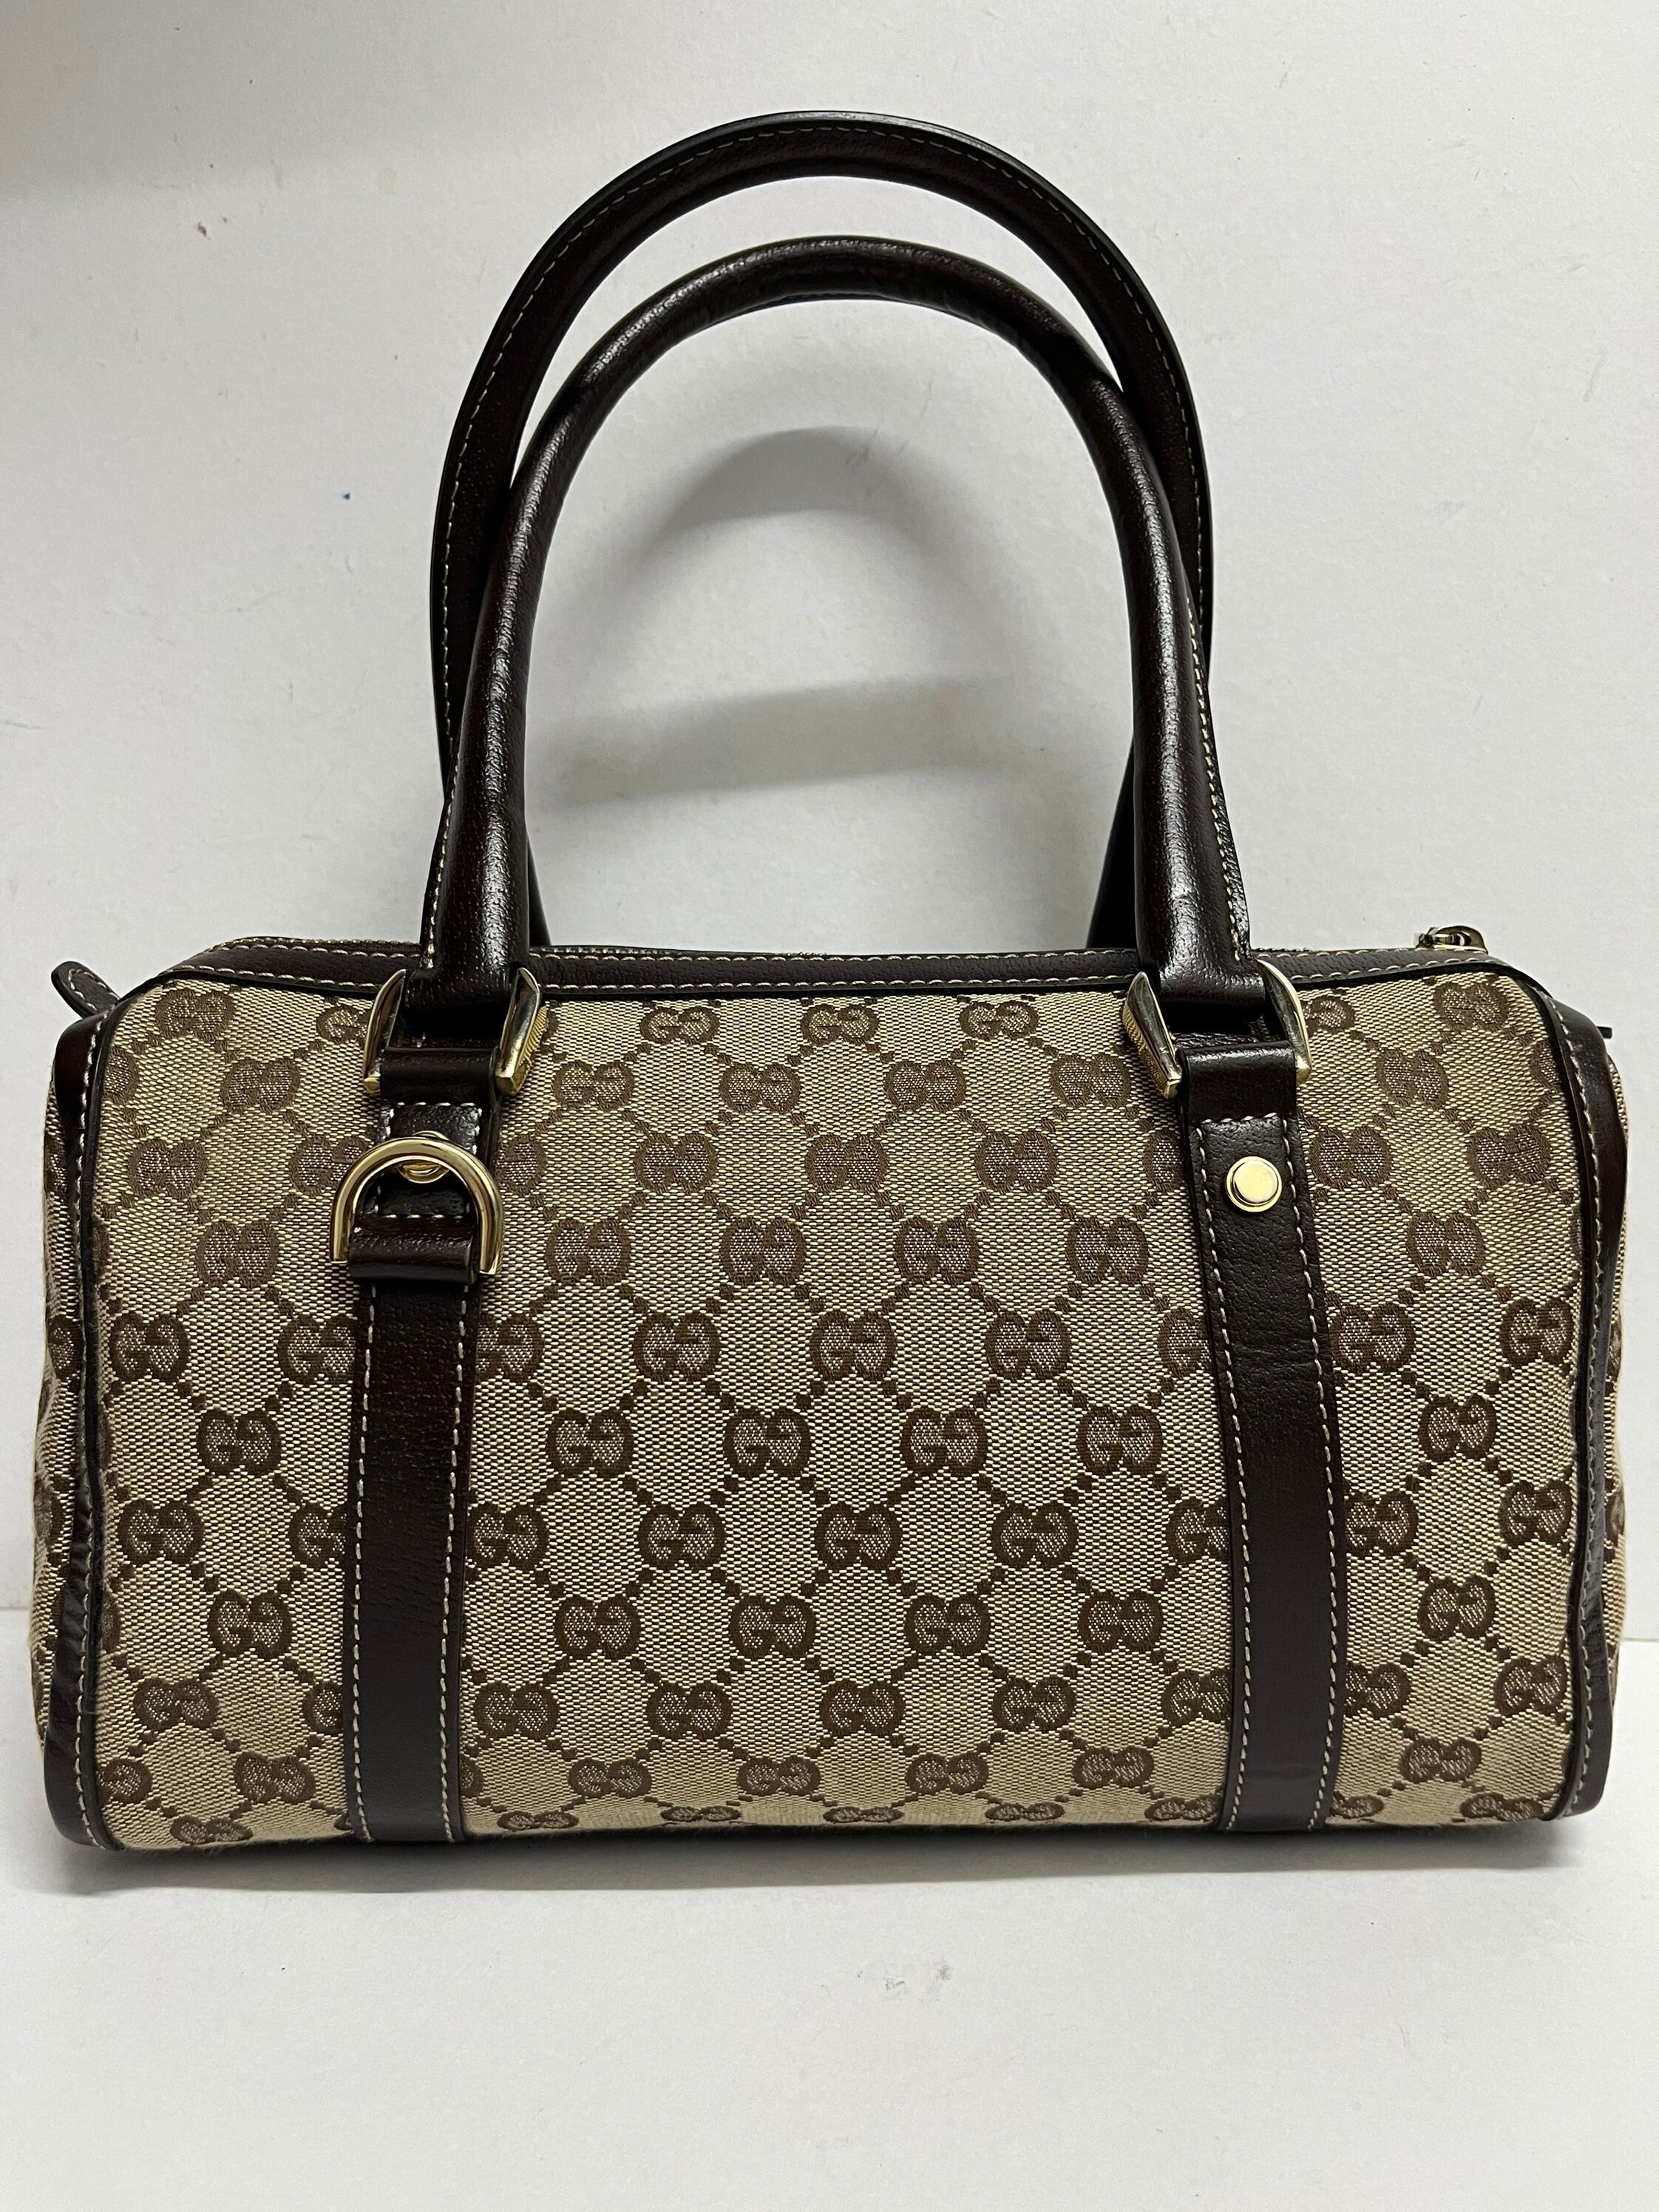 Used Gucci Bag - Etsy